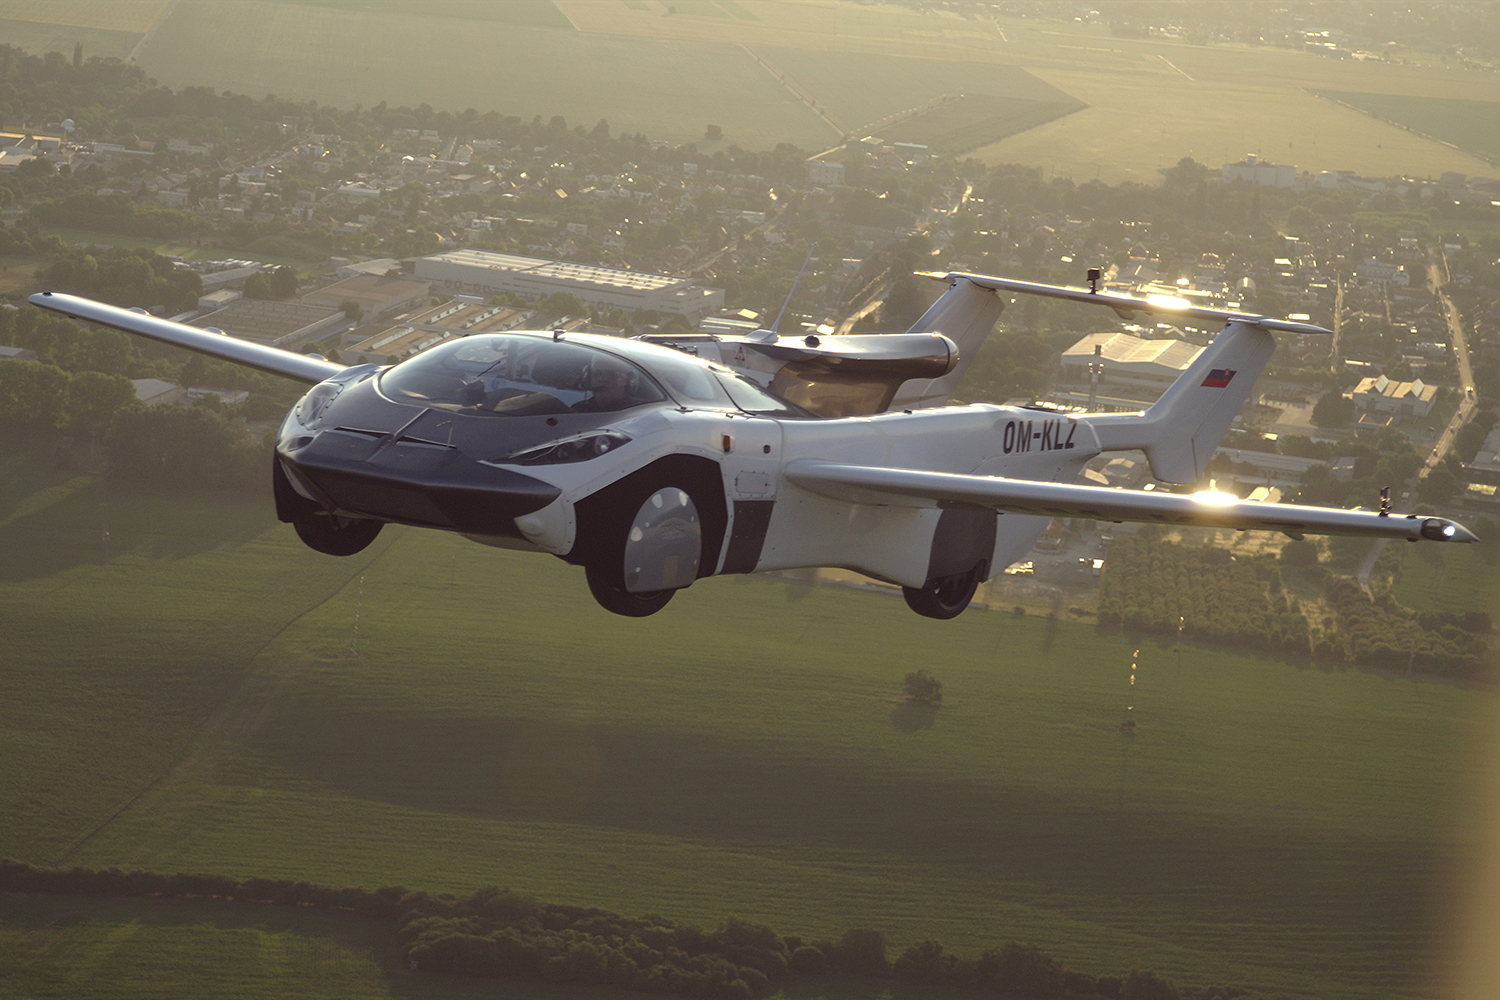 The AirCar flying car from Klein Vision flying between Nitra and Bratislava in Slovakia by inventor Stefan Klein